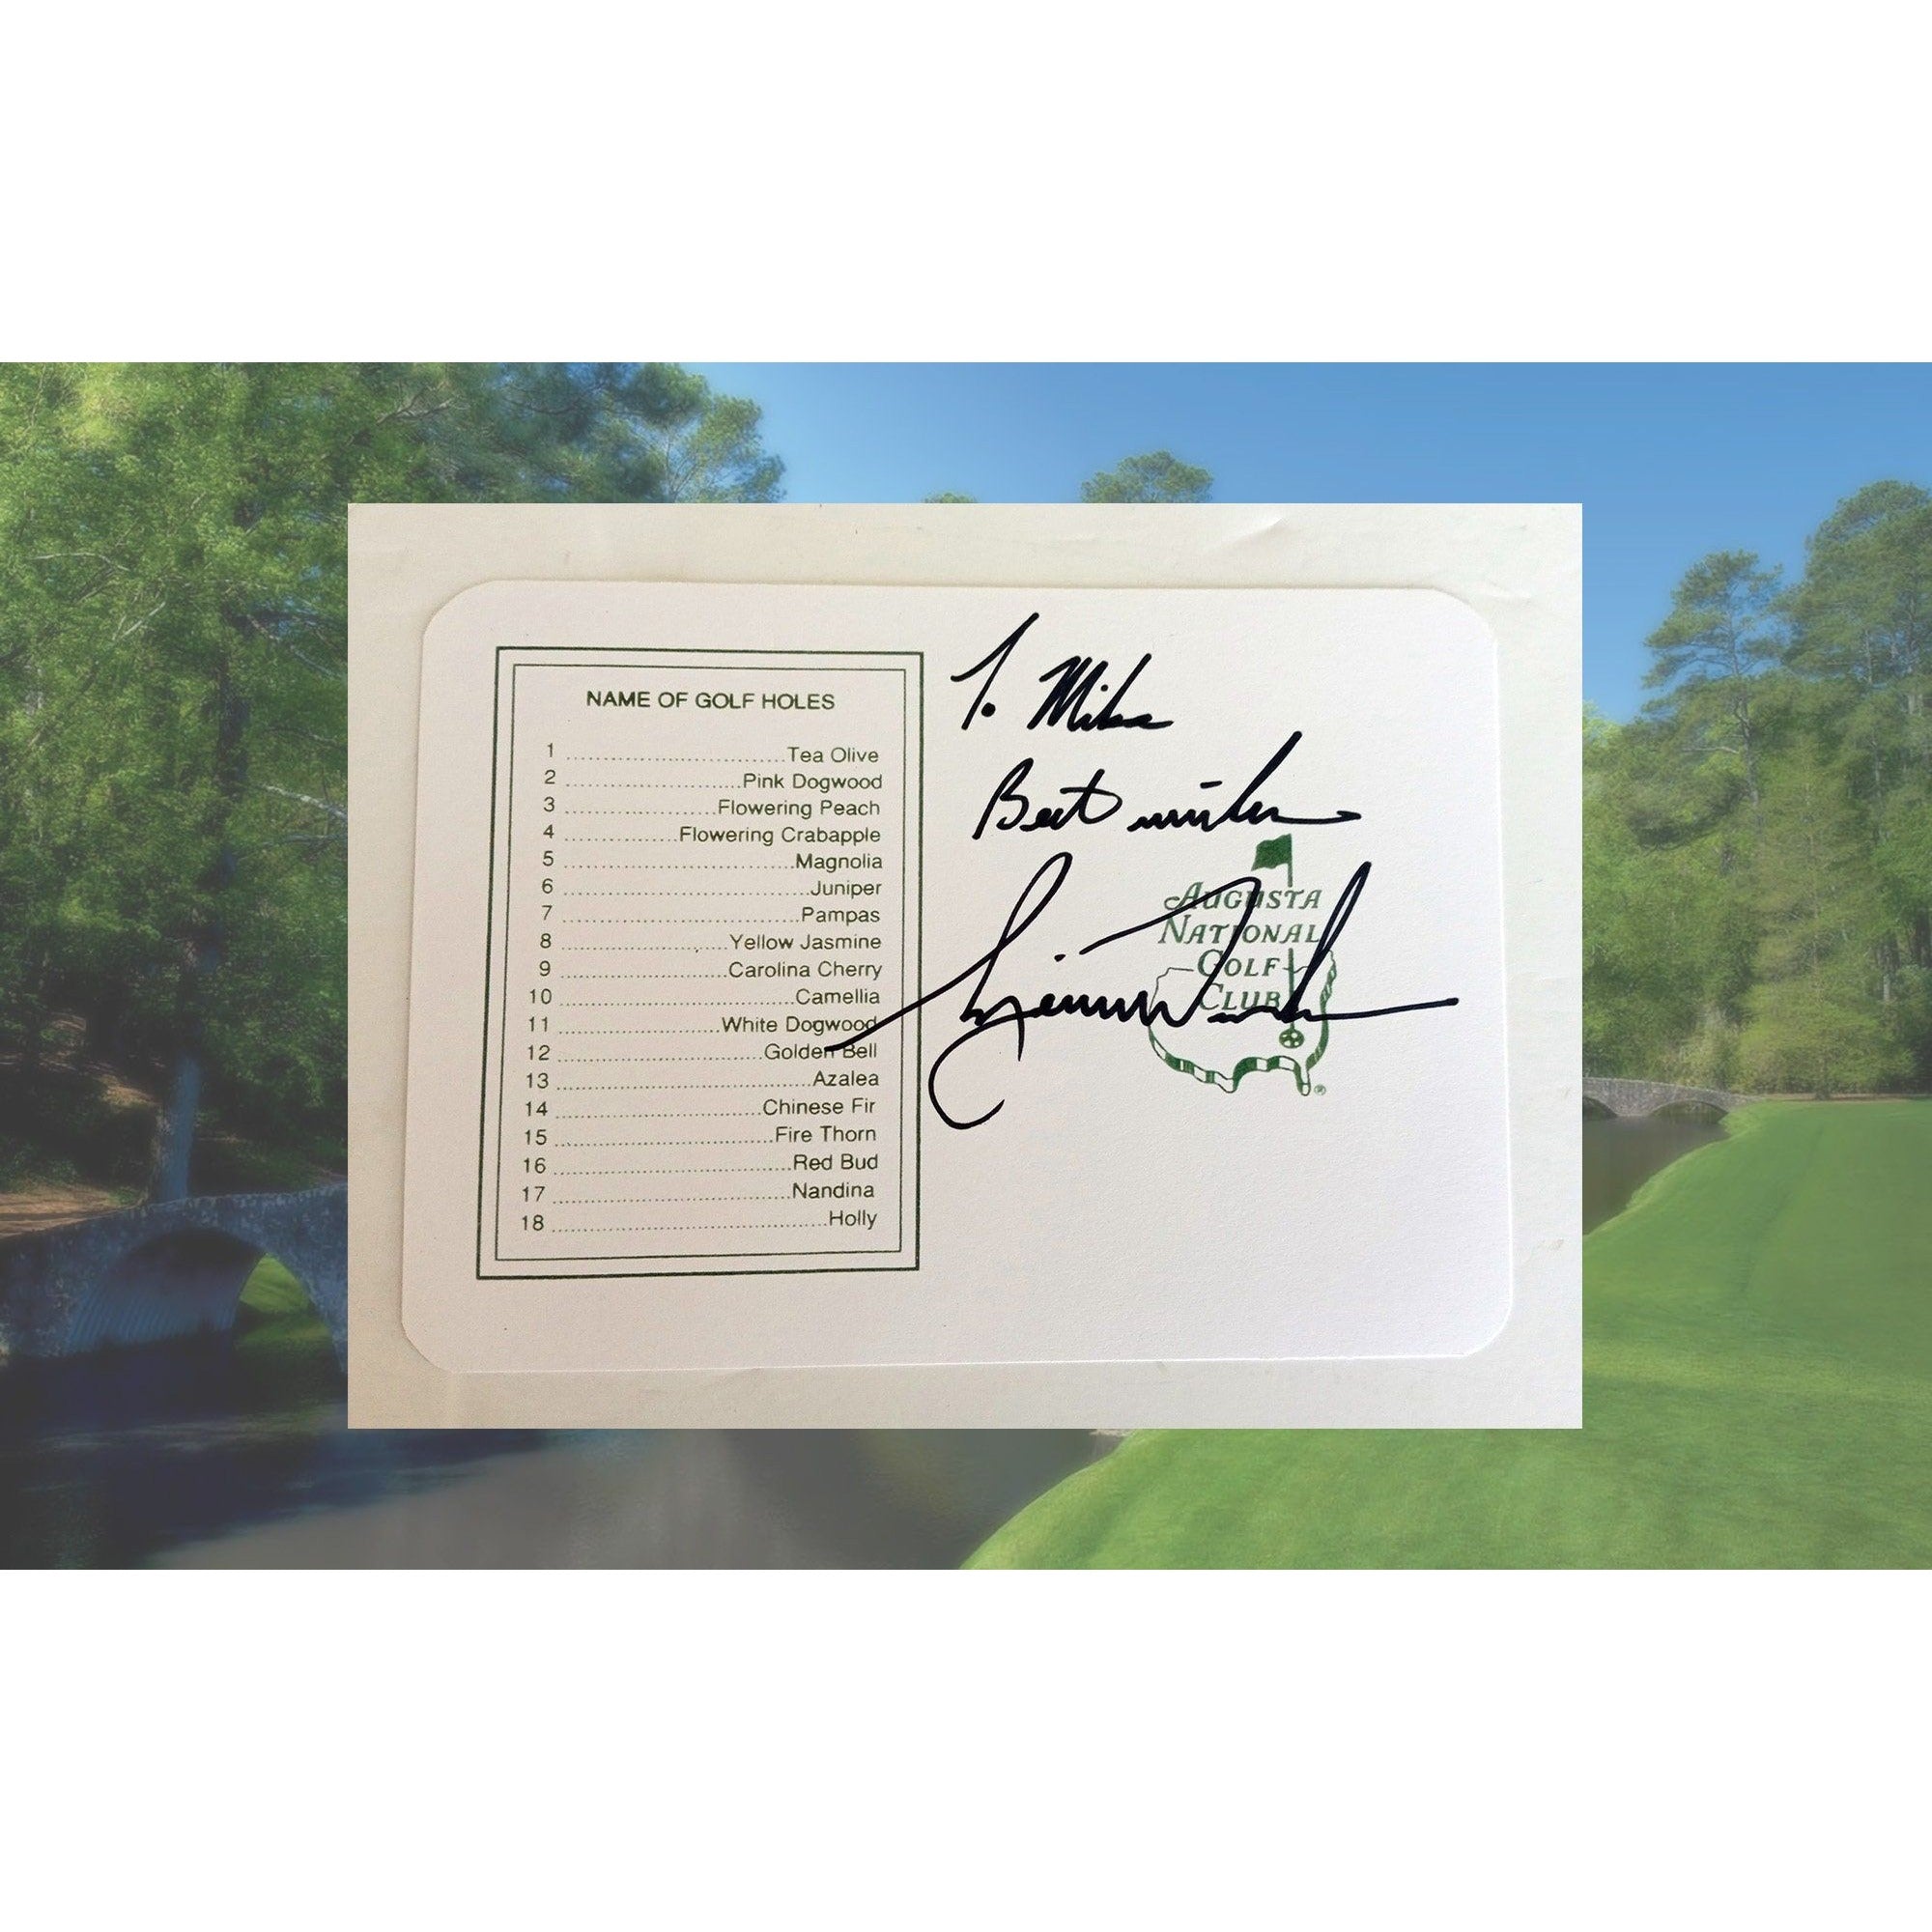 Tiger Woods Masters scorecard personalized signed to Mike signed with proof